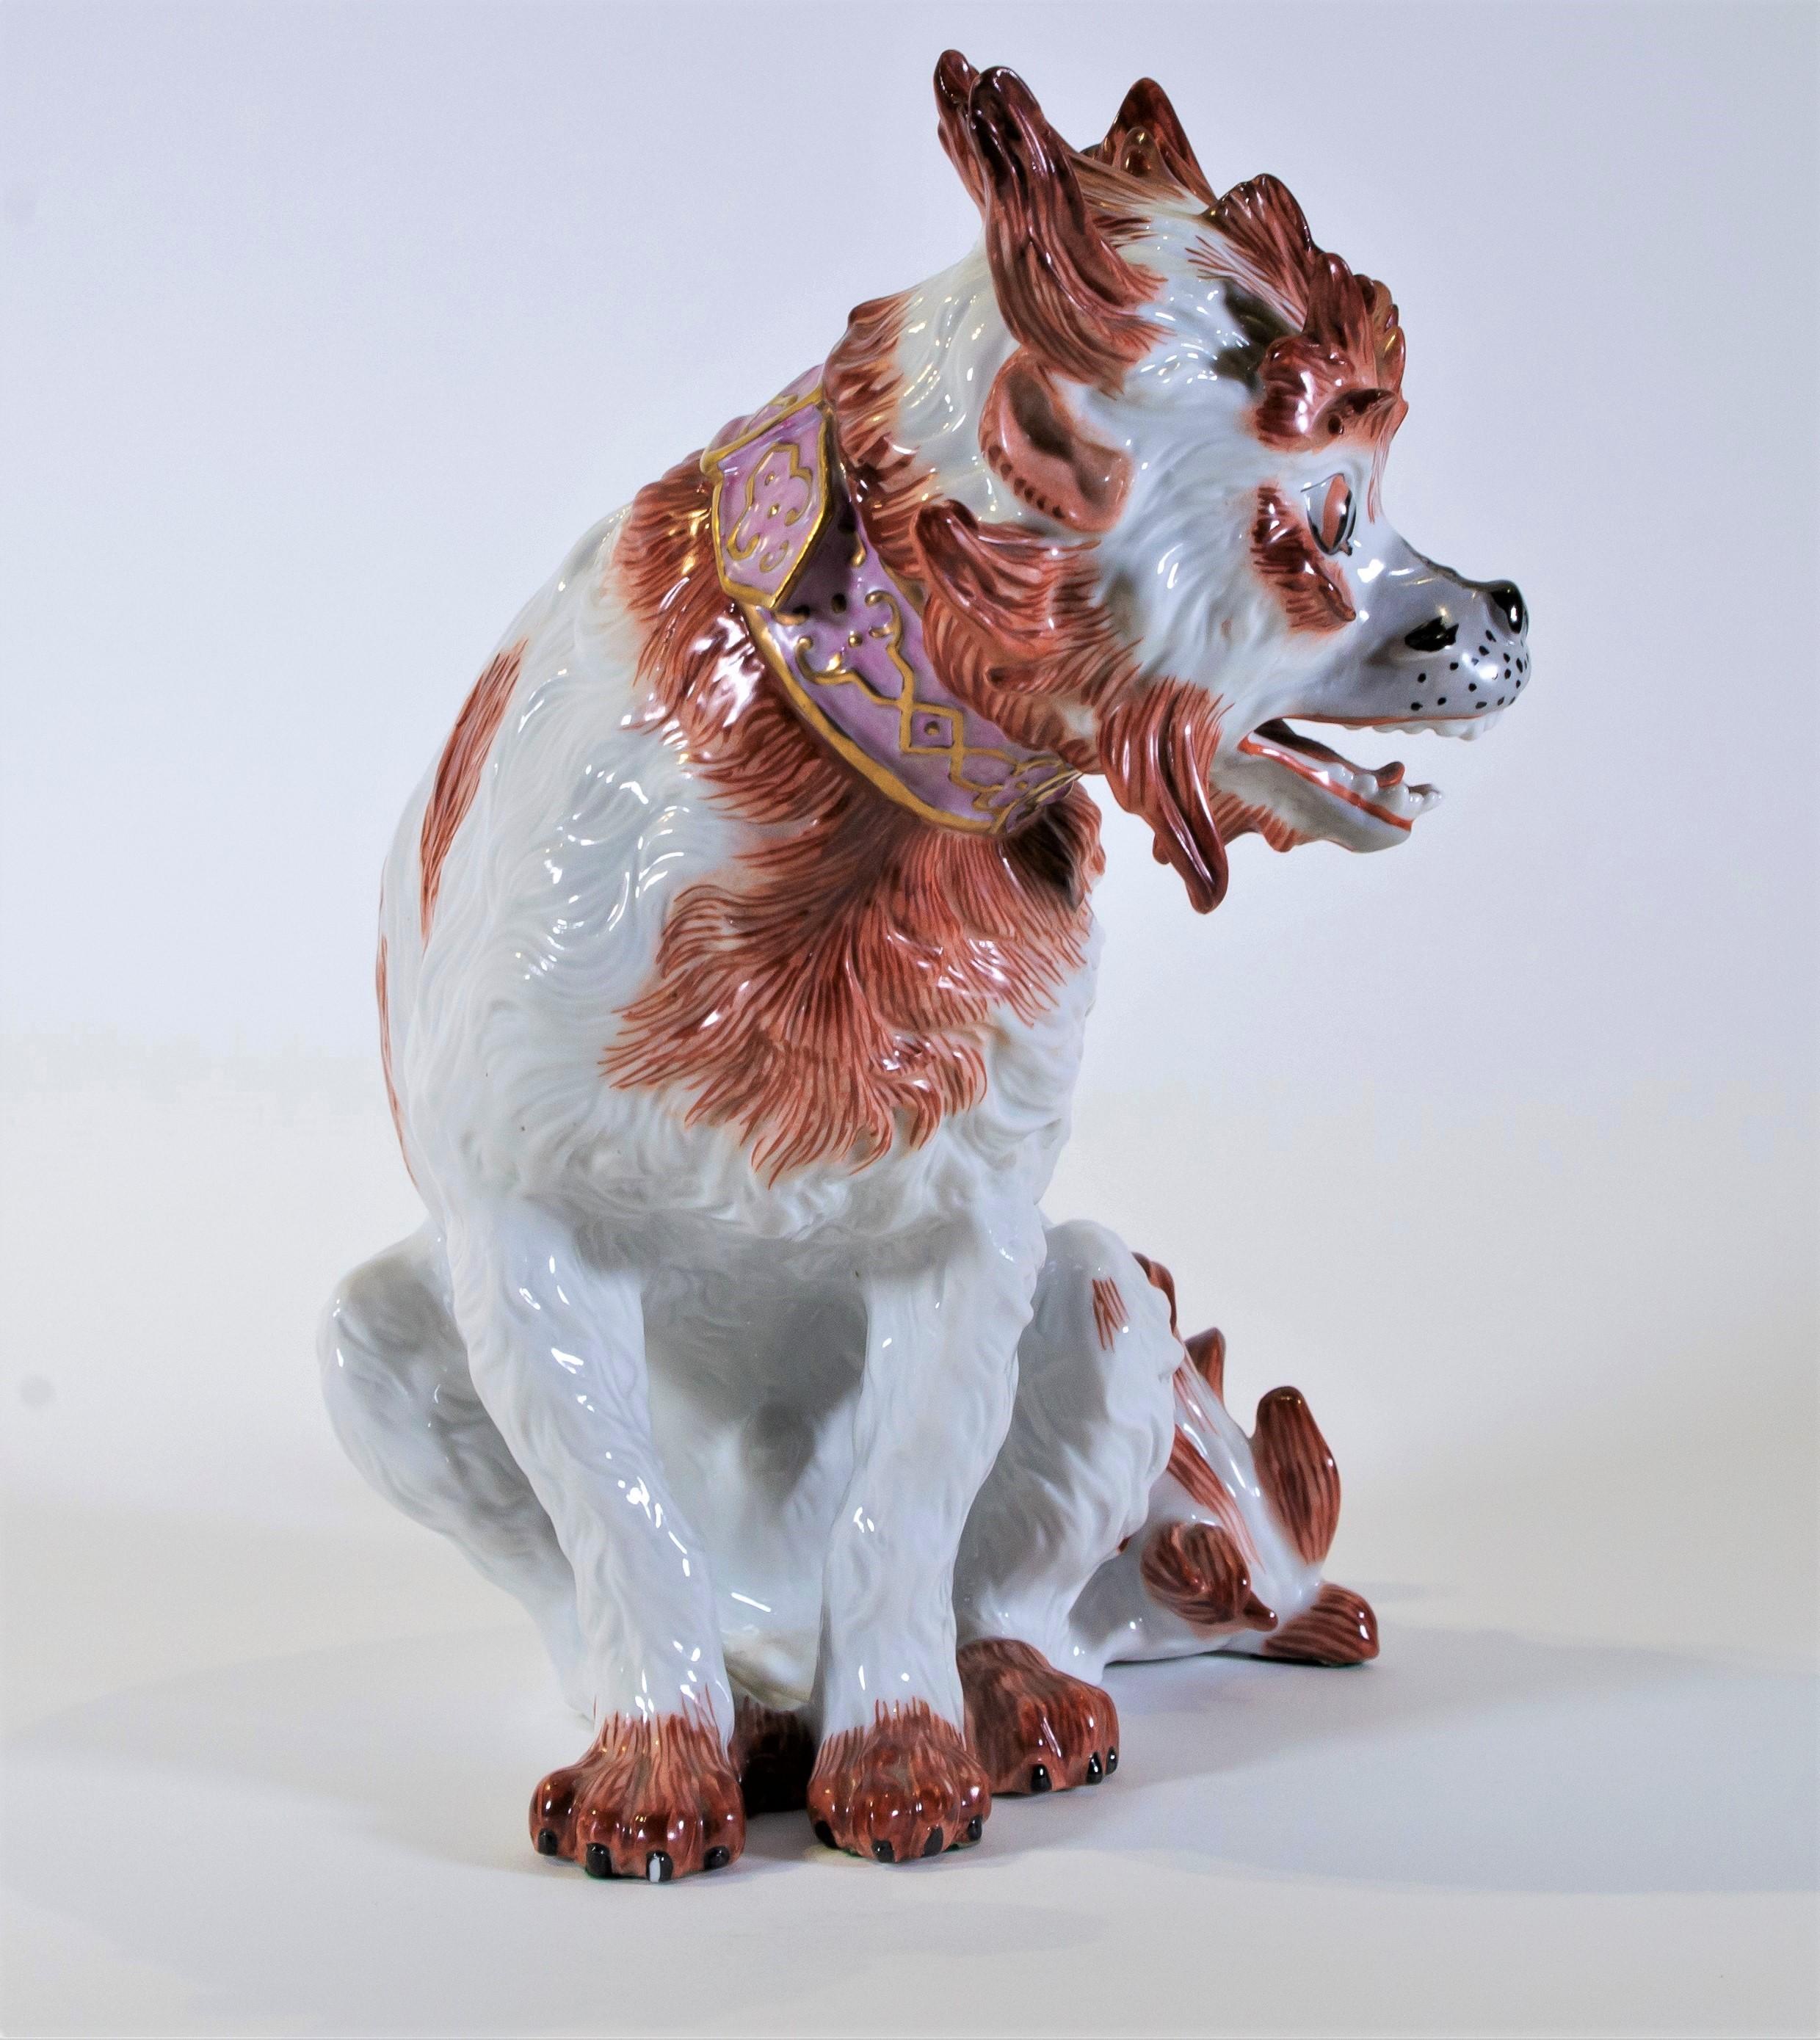 A fabulous antique 19th century porcelain model of a bolognese dog, signed Deresden in Underglaze blue mark, After the Original Meissen Model by Johann Gottlieb Kirchner. The dog is painted with a beautiful white coat with reddish/orange spots and